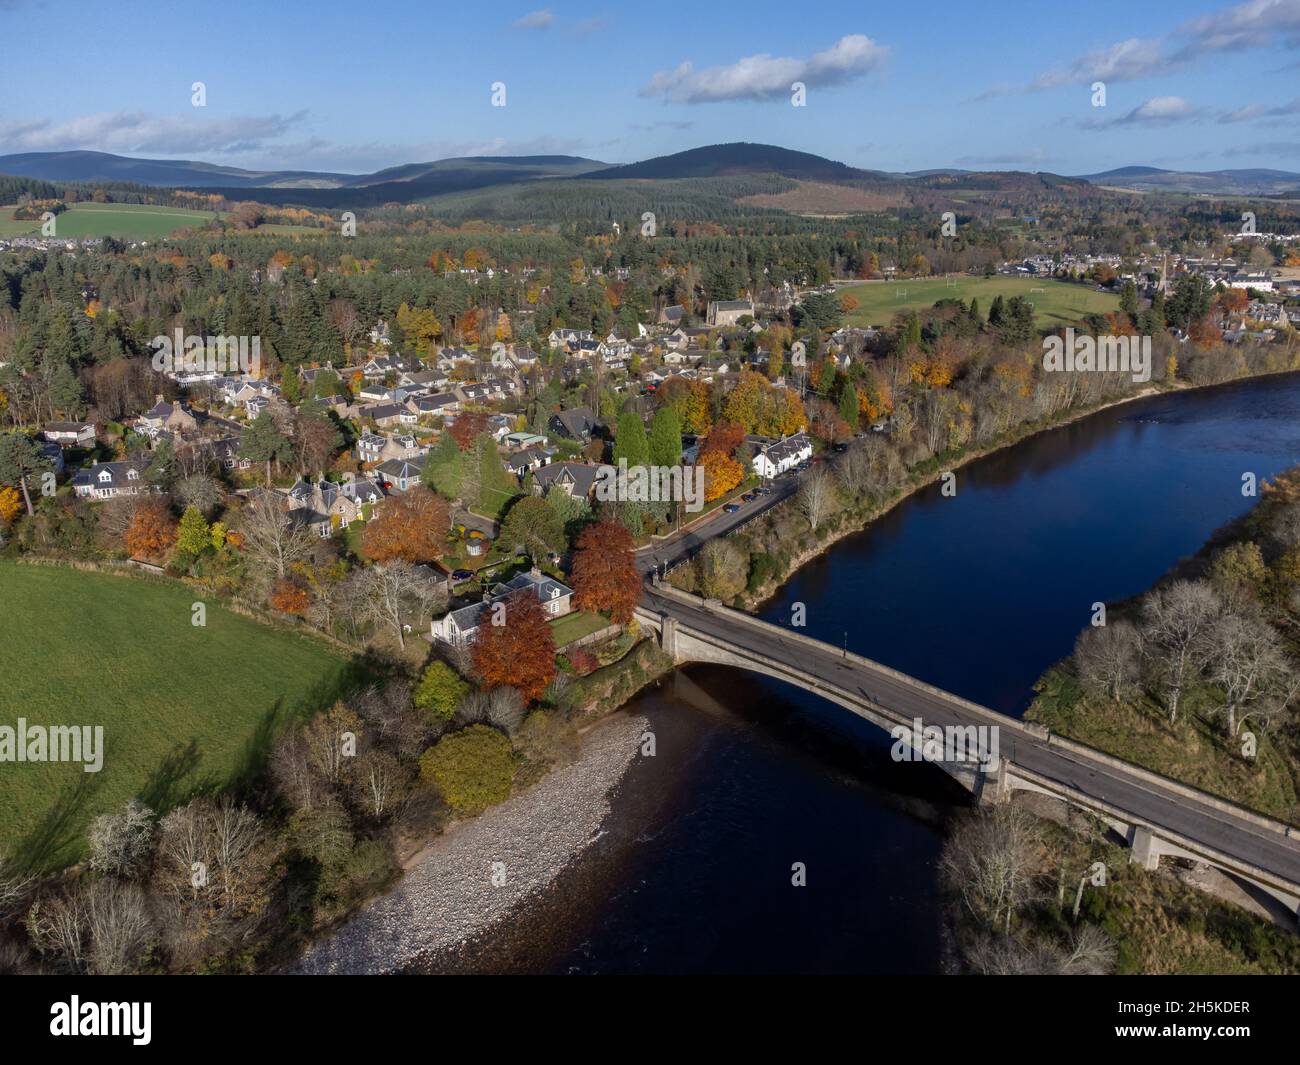 Aerial picture of the village of Aboyne in Royal Deeside, Aberdeenshire, Scotland. The Aboyne Bridge over the River Dee can be seen Stock Photo